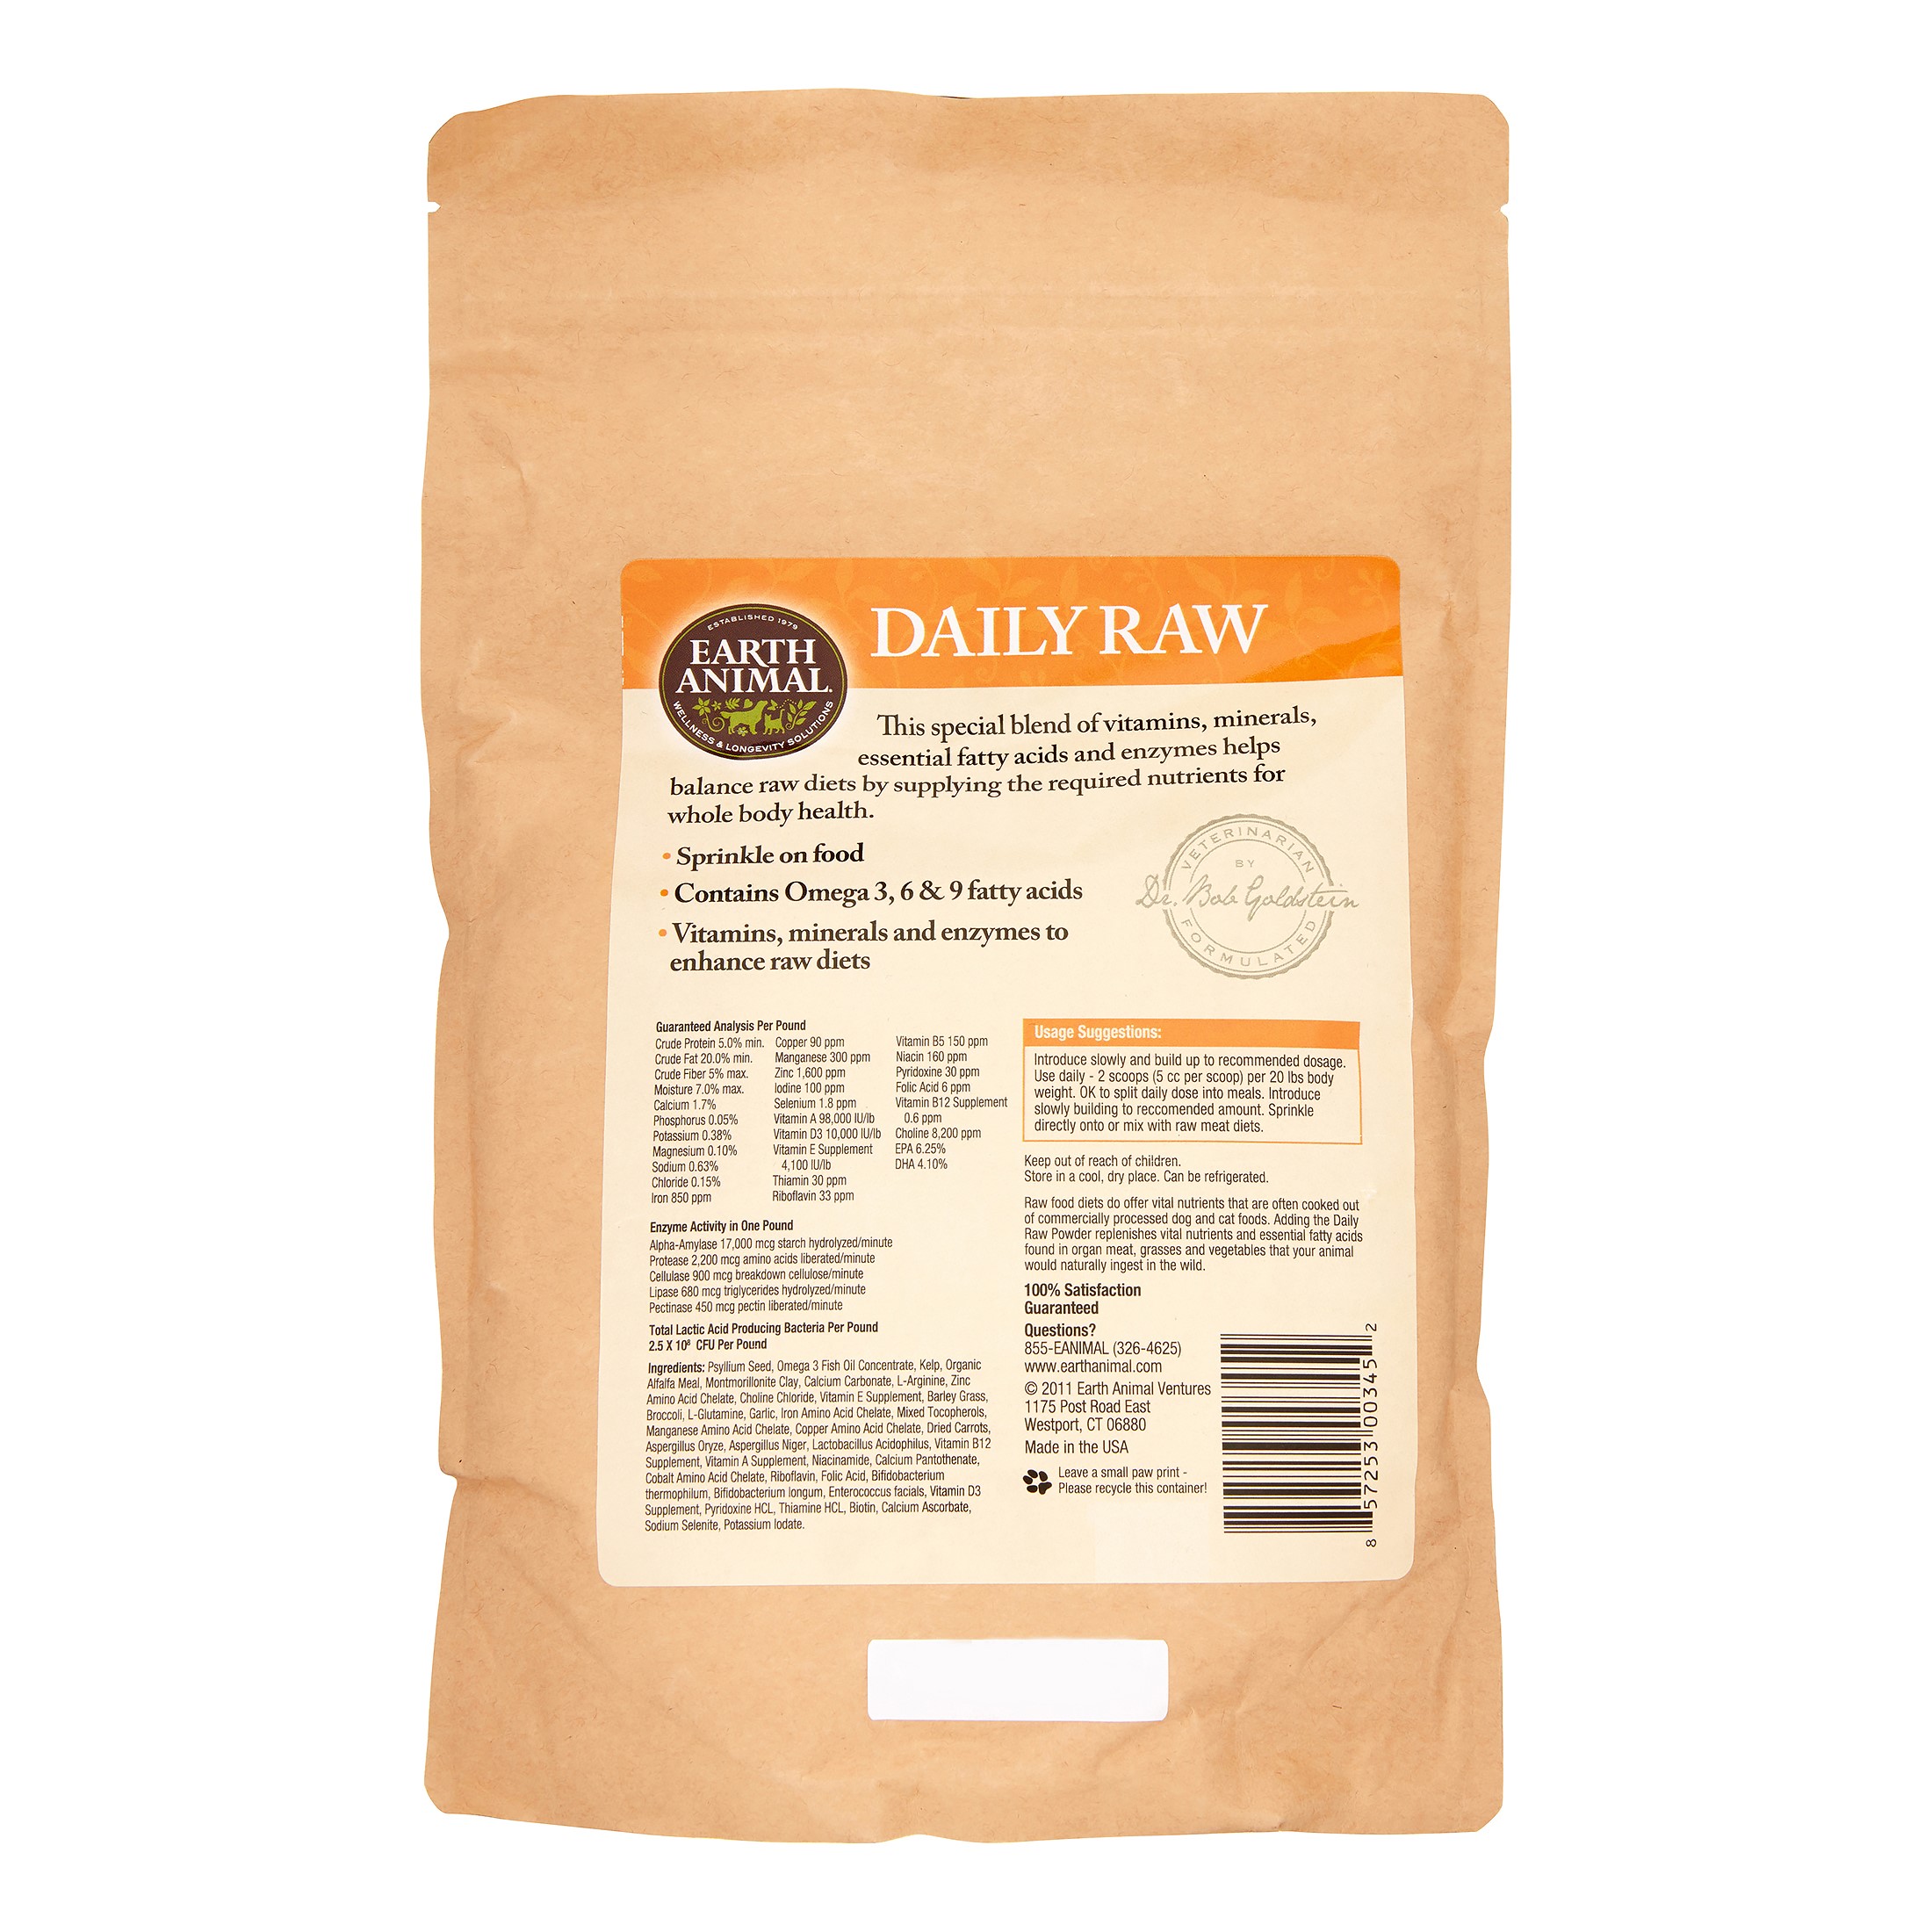 Earth Animal Daily Raw Complete Powder Dog & Cat Supplement, 1 Lb - image 2 of 3